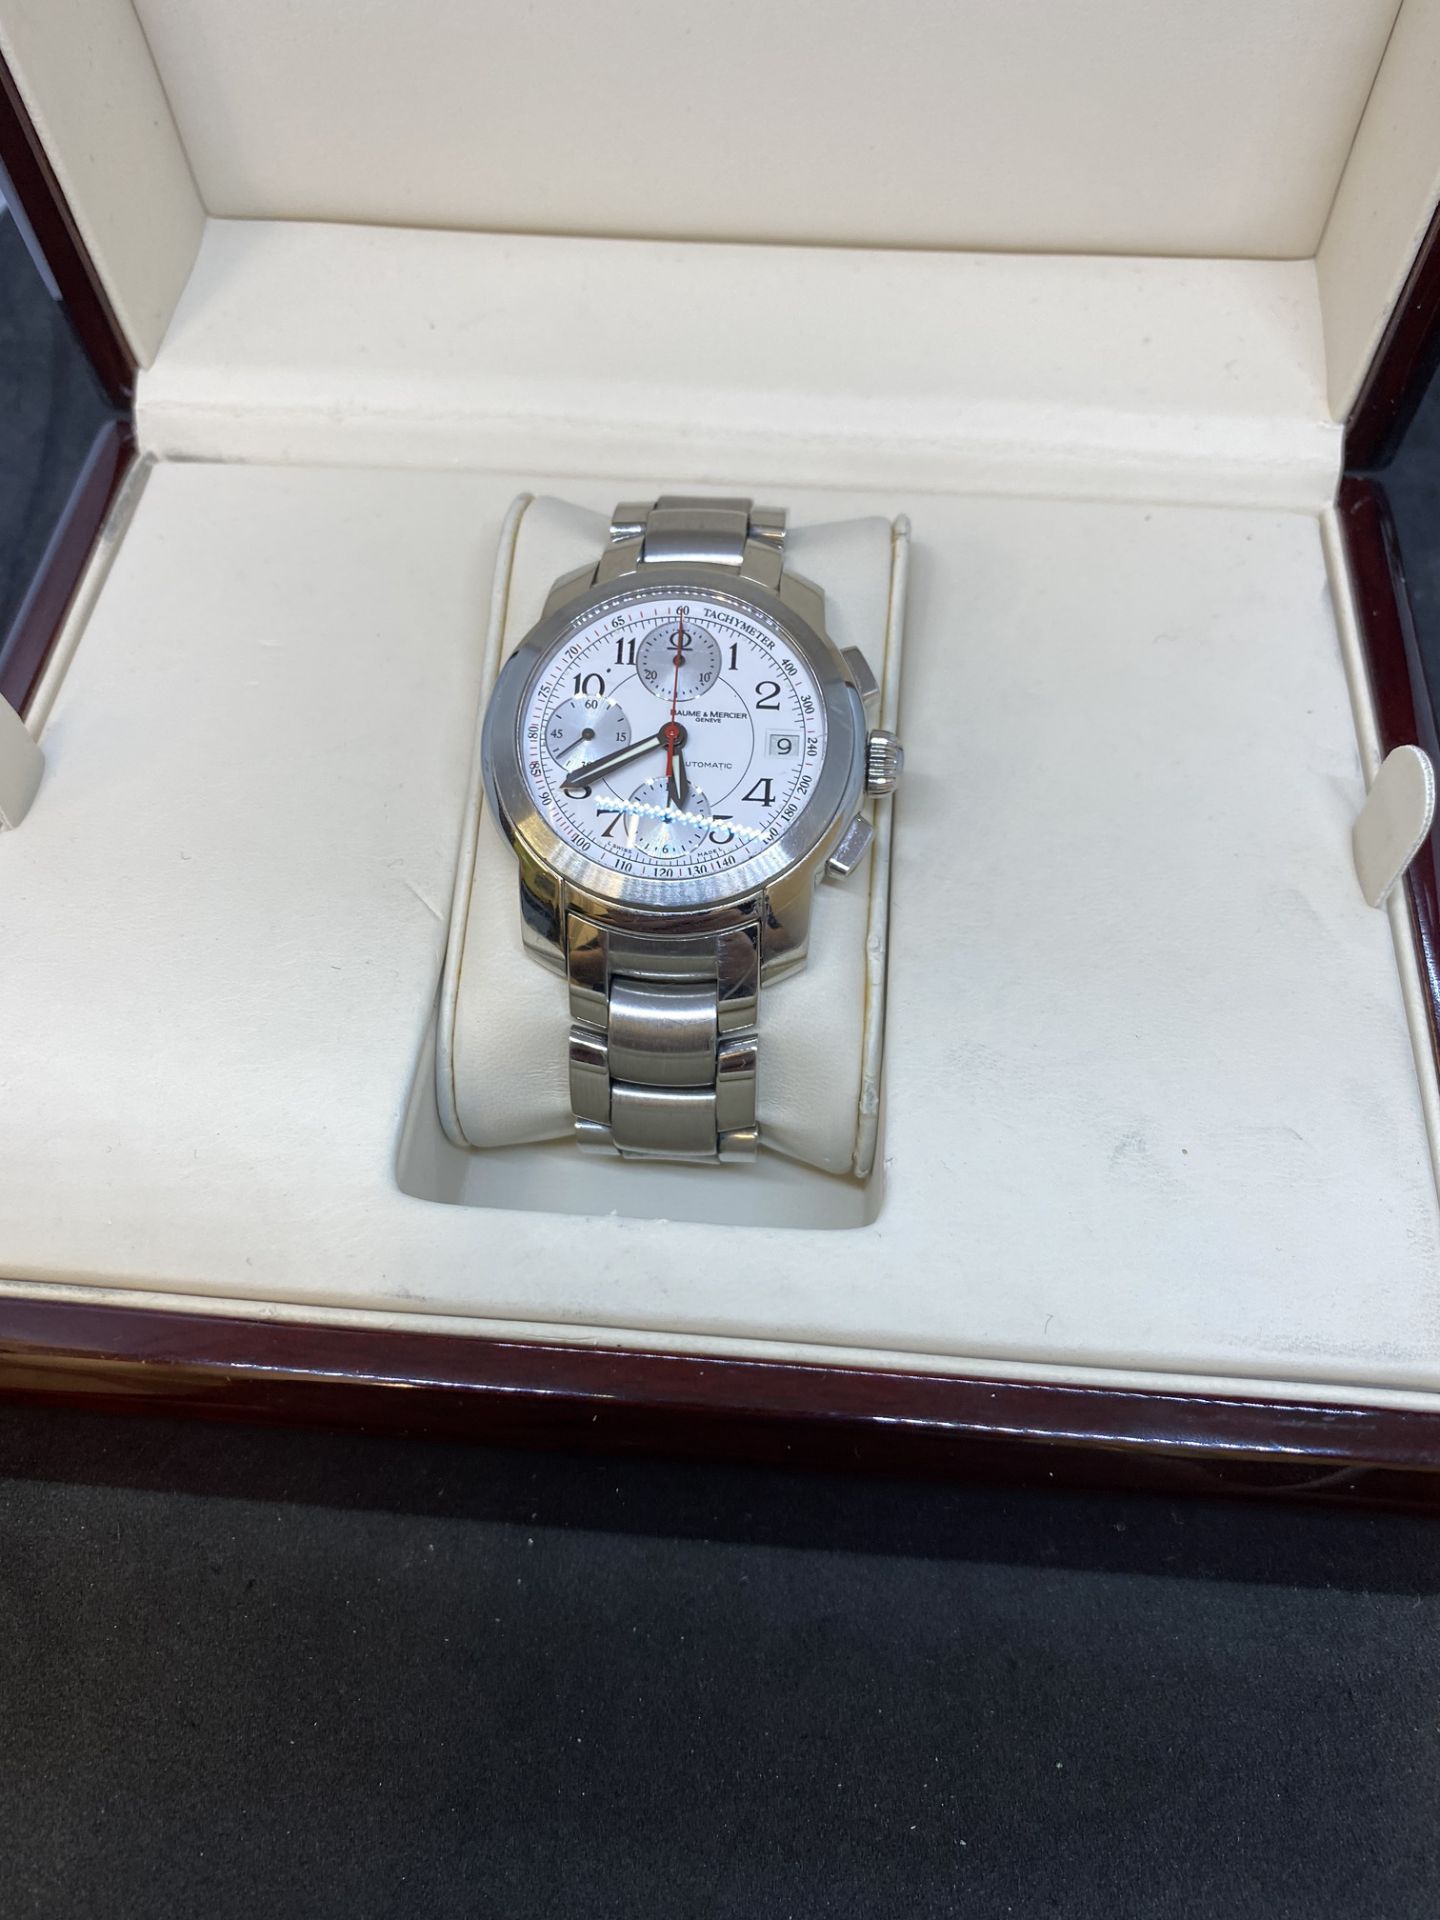 BAUME & MERCIER AUTOMATIC STAINLESS STEEL CHRONO WATCH - Image 2 of 8